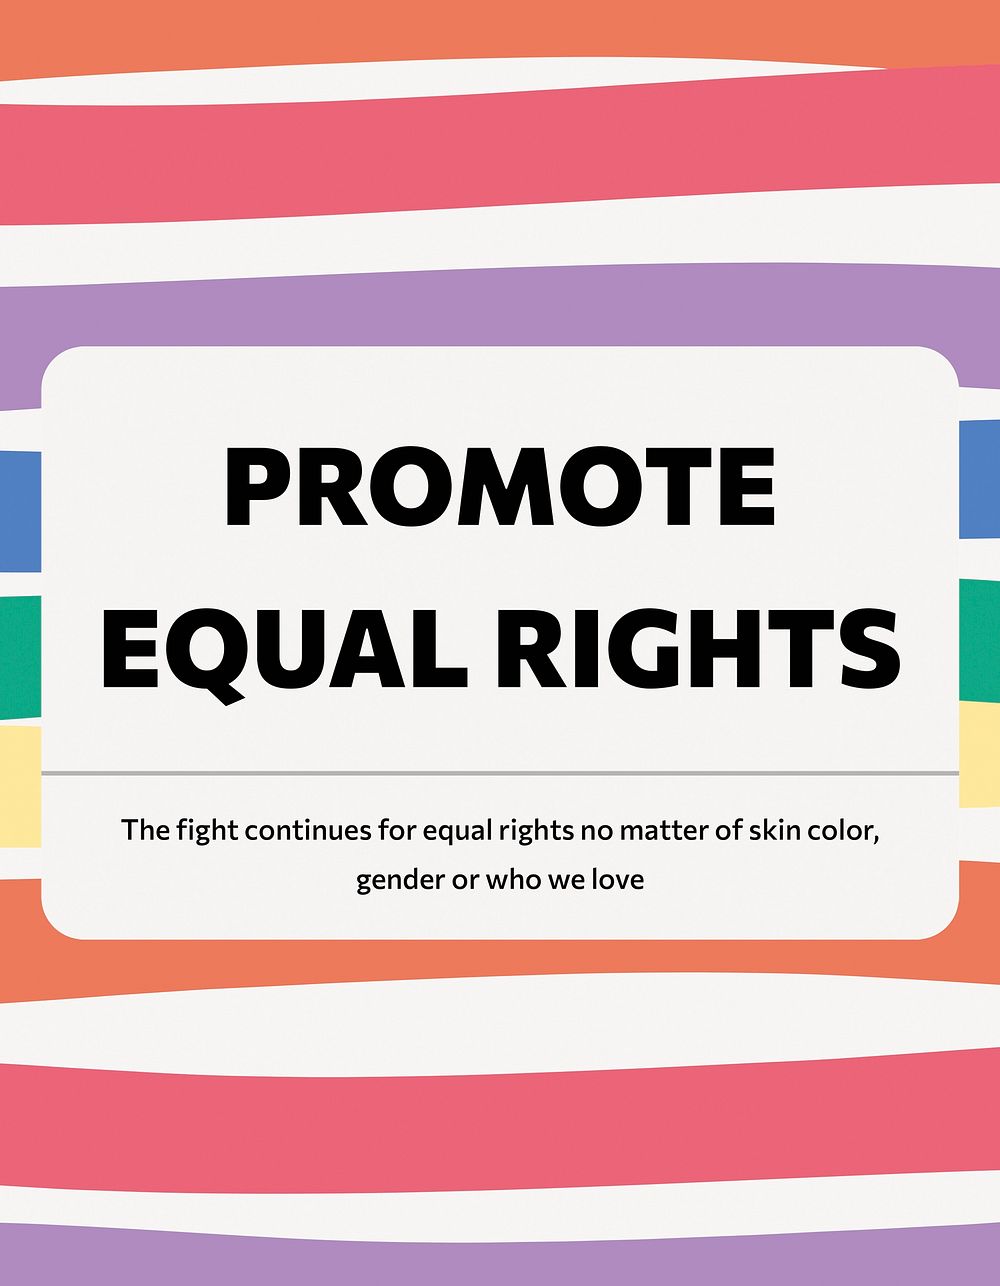 Promote equal rights flyer template, Pride Month celebration psd